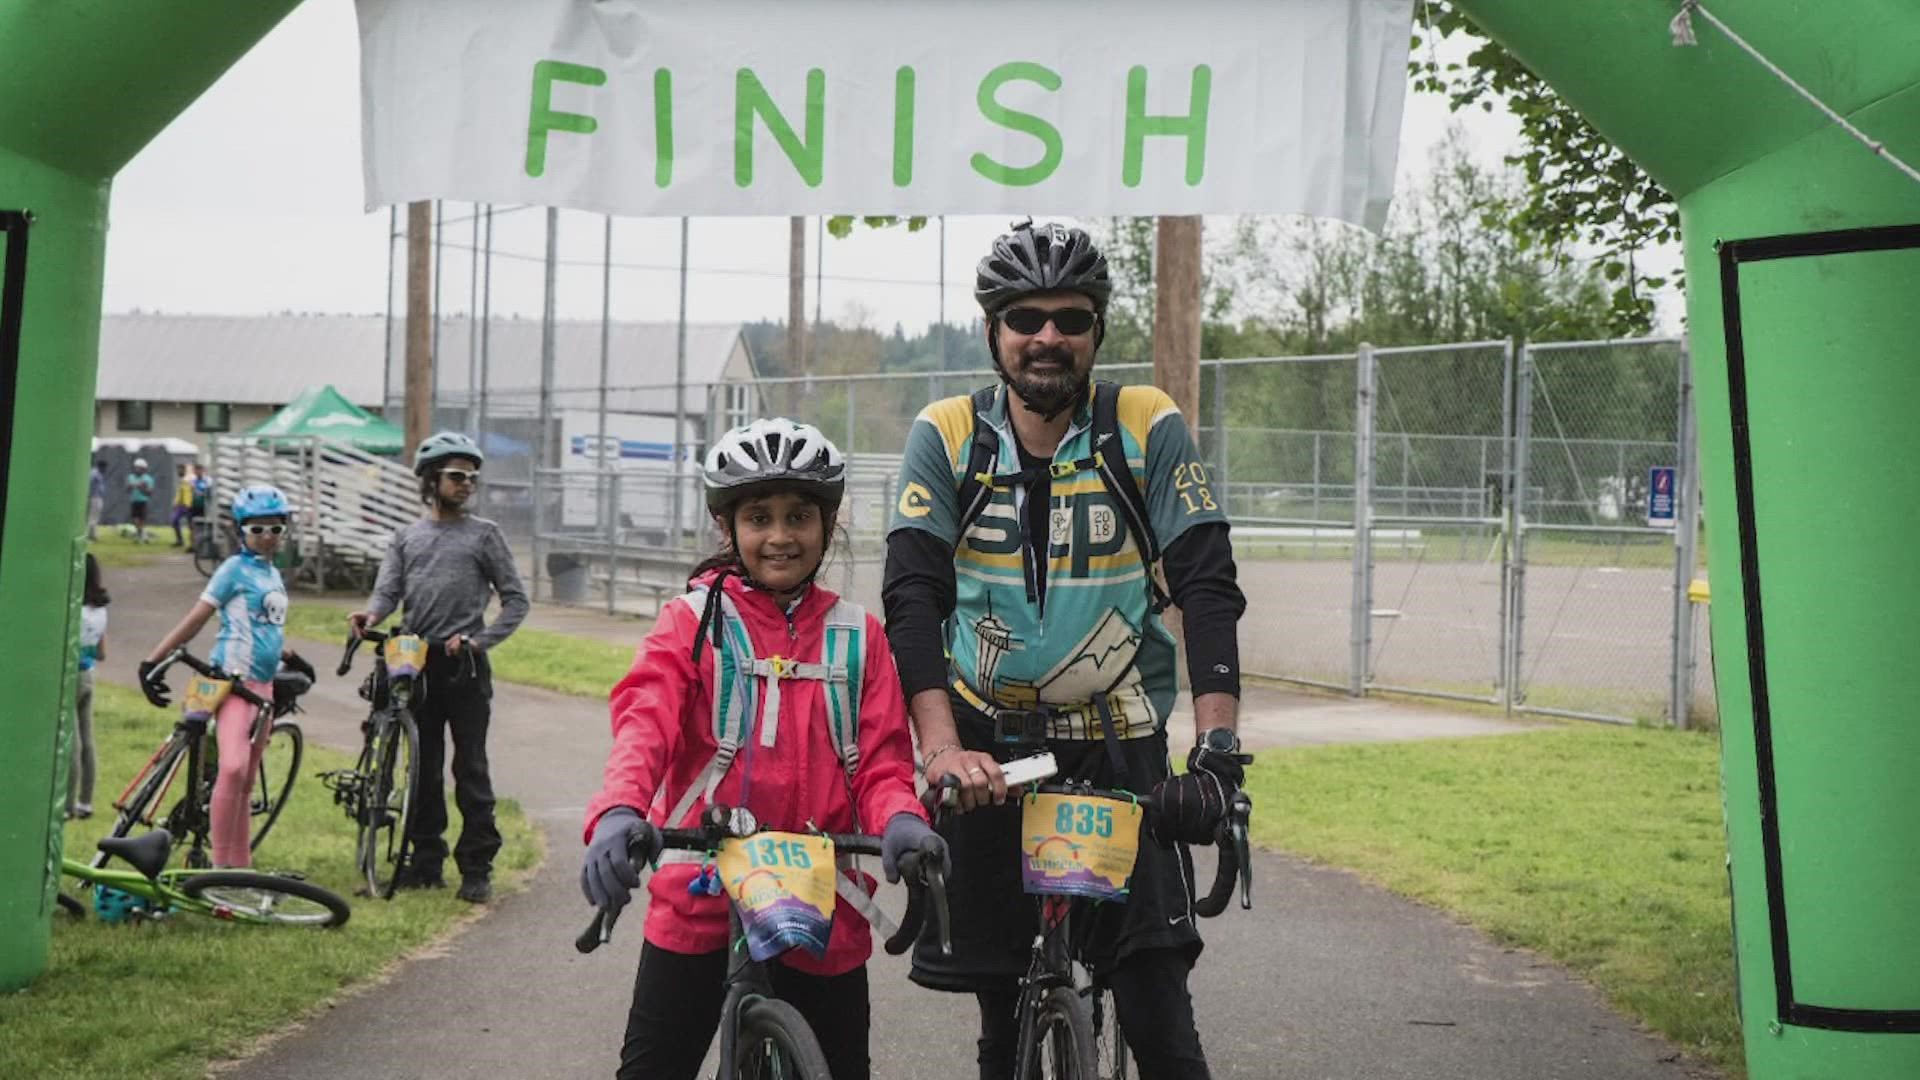 Janyaa Teli missed summer camp and even some friends' birthday parties to train for the ride. She is raising money for a non-profit that supports education in India.